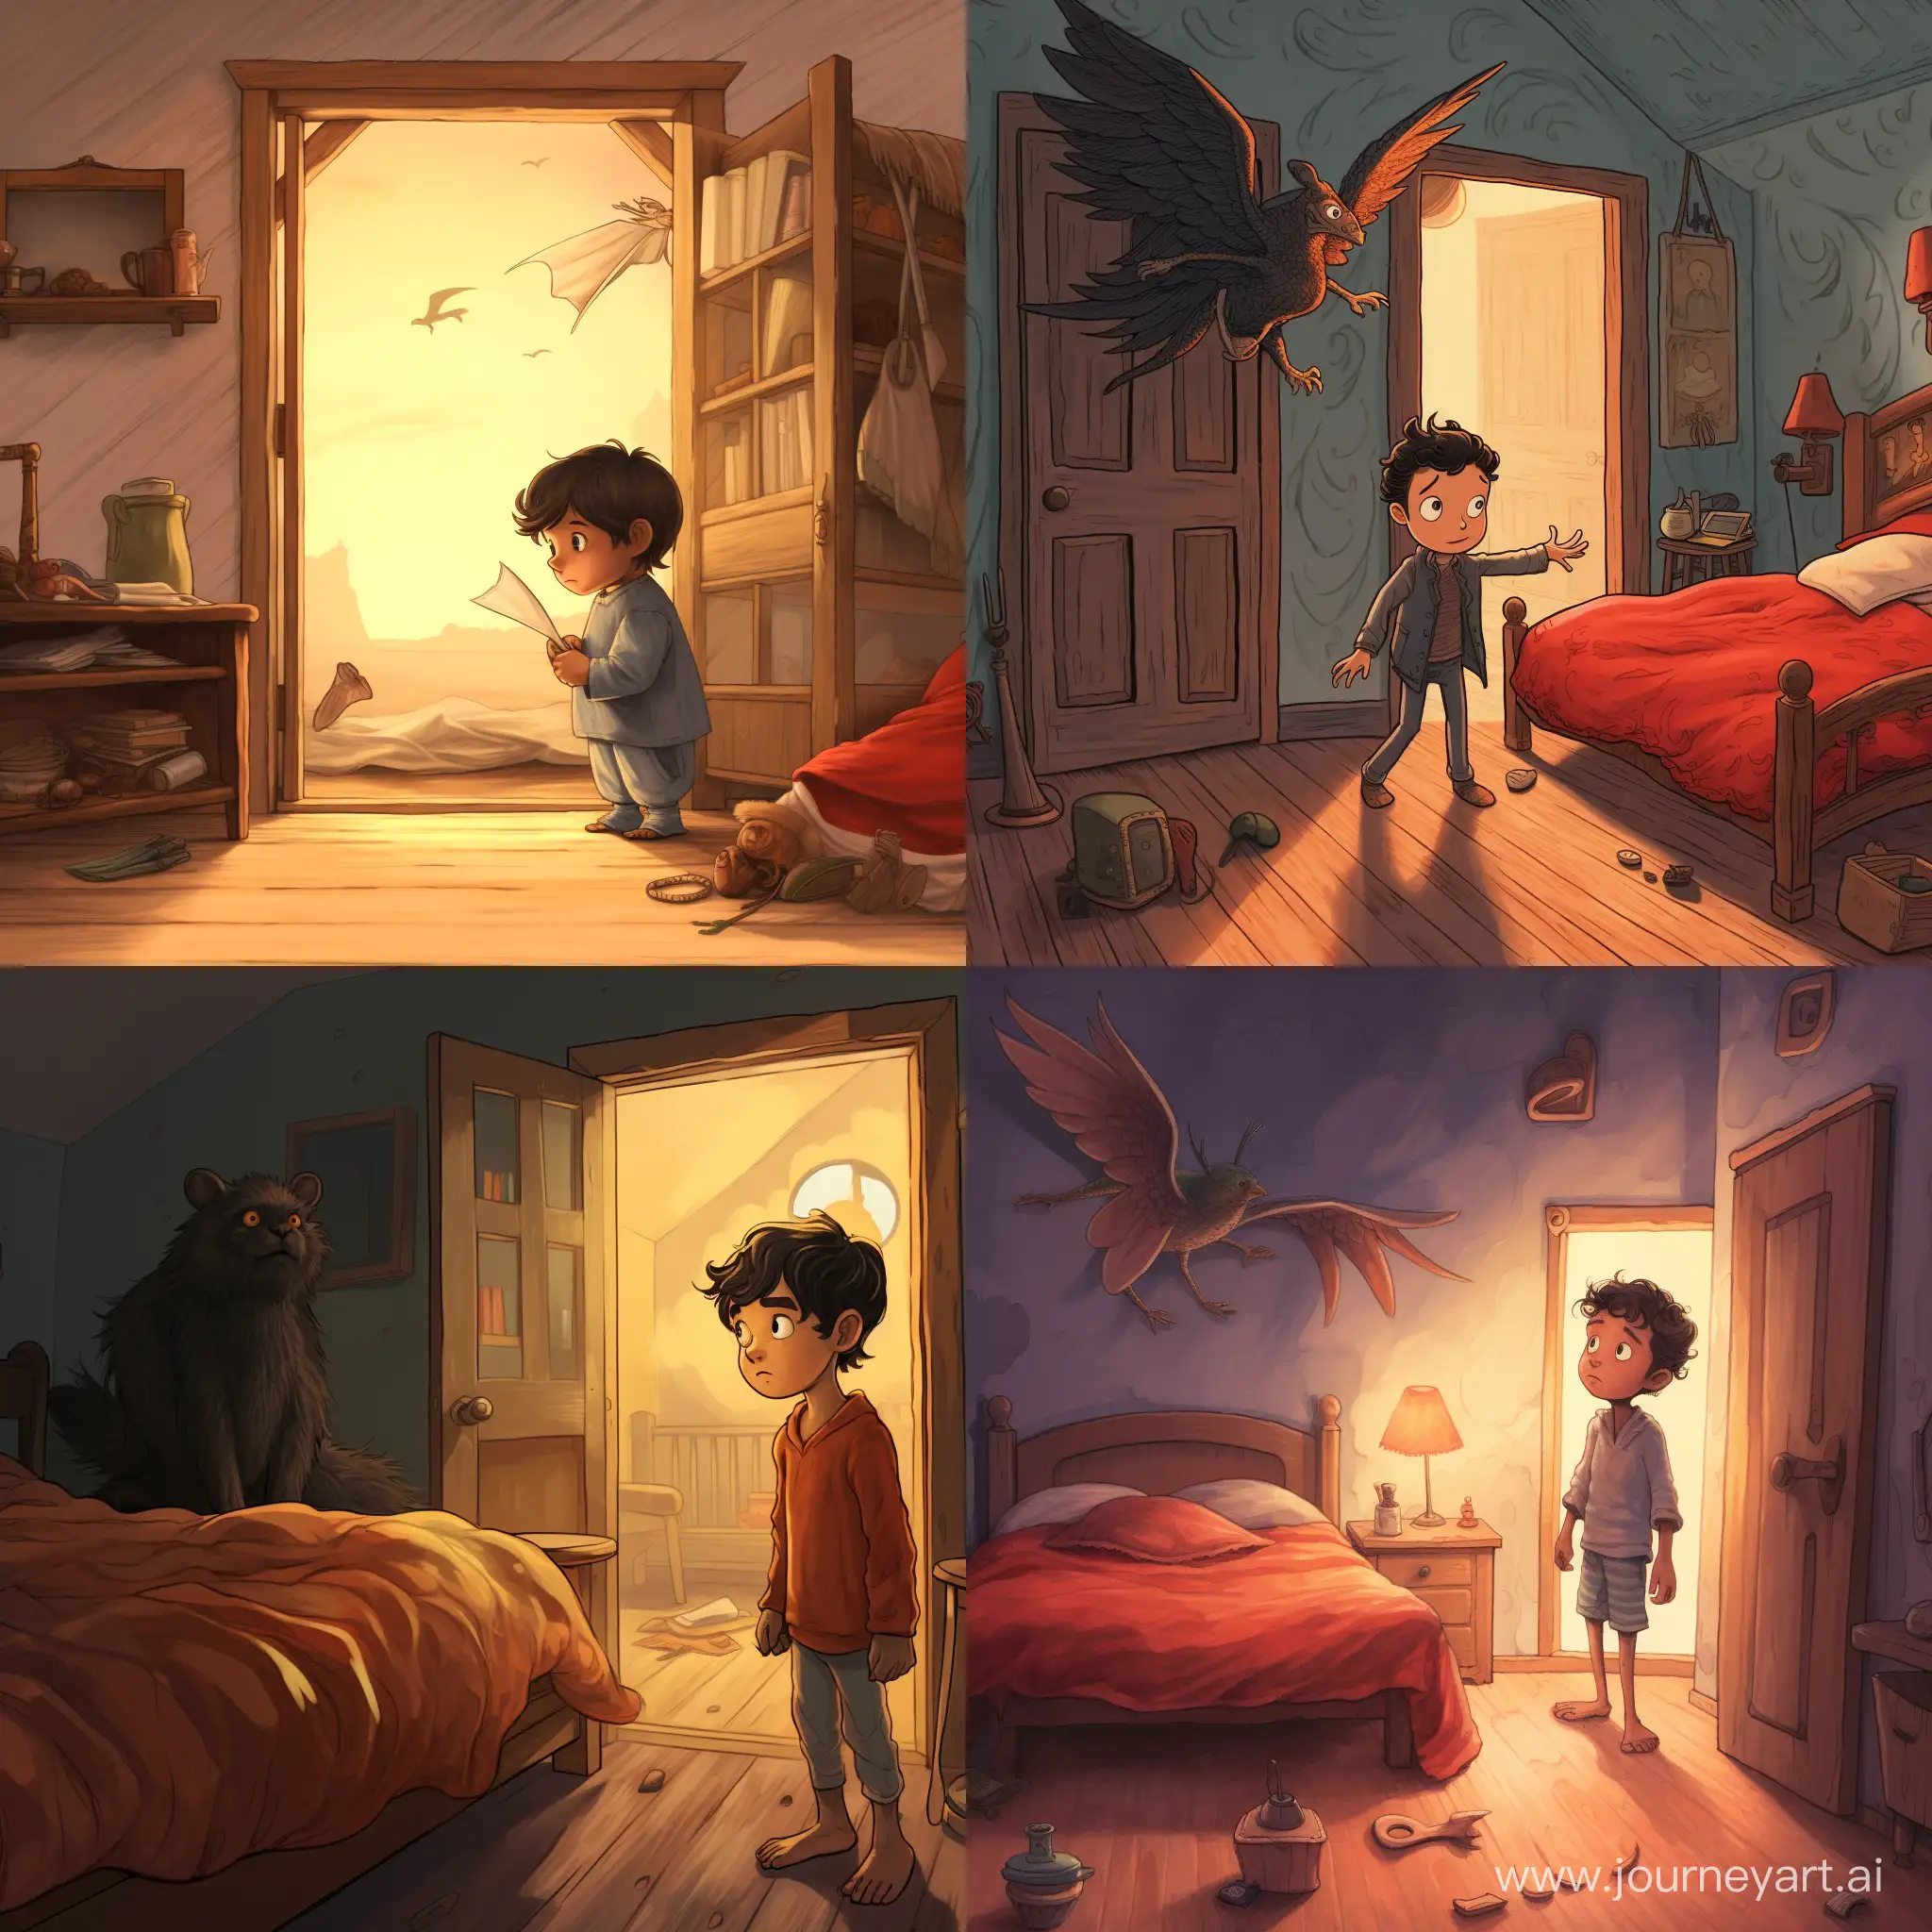 Lucifer wakes up and discovers a mysterious door in his room, storybook illustration